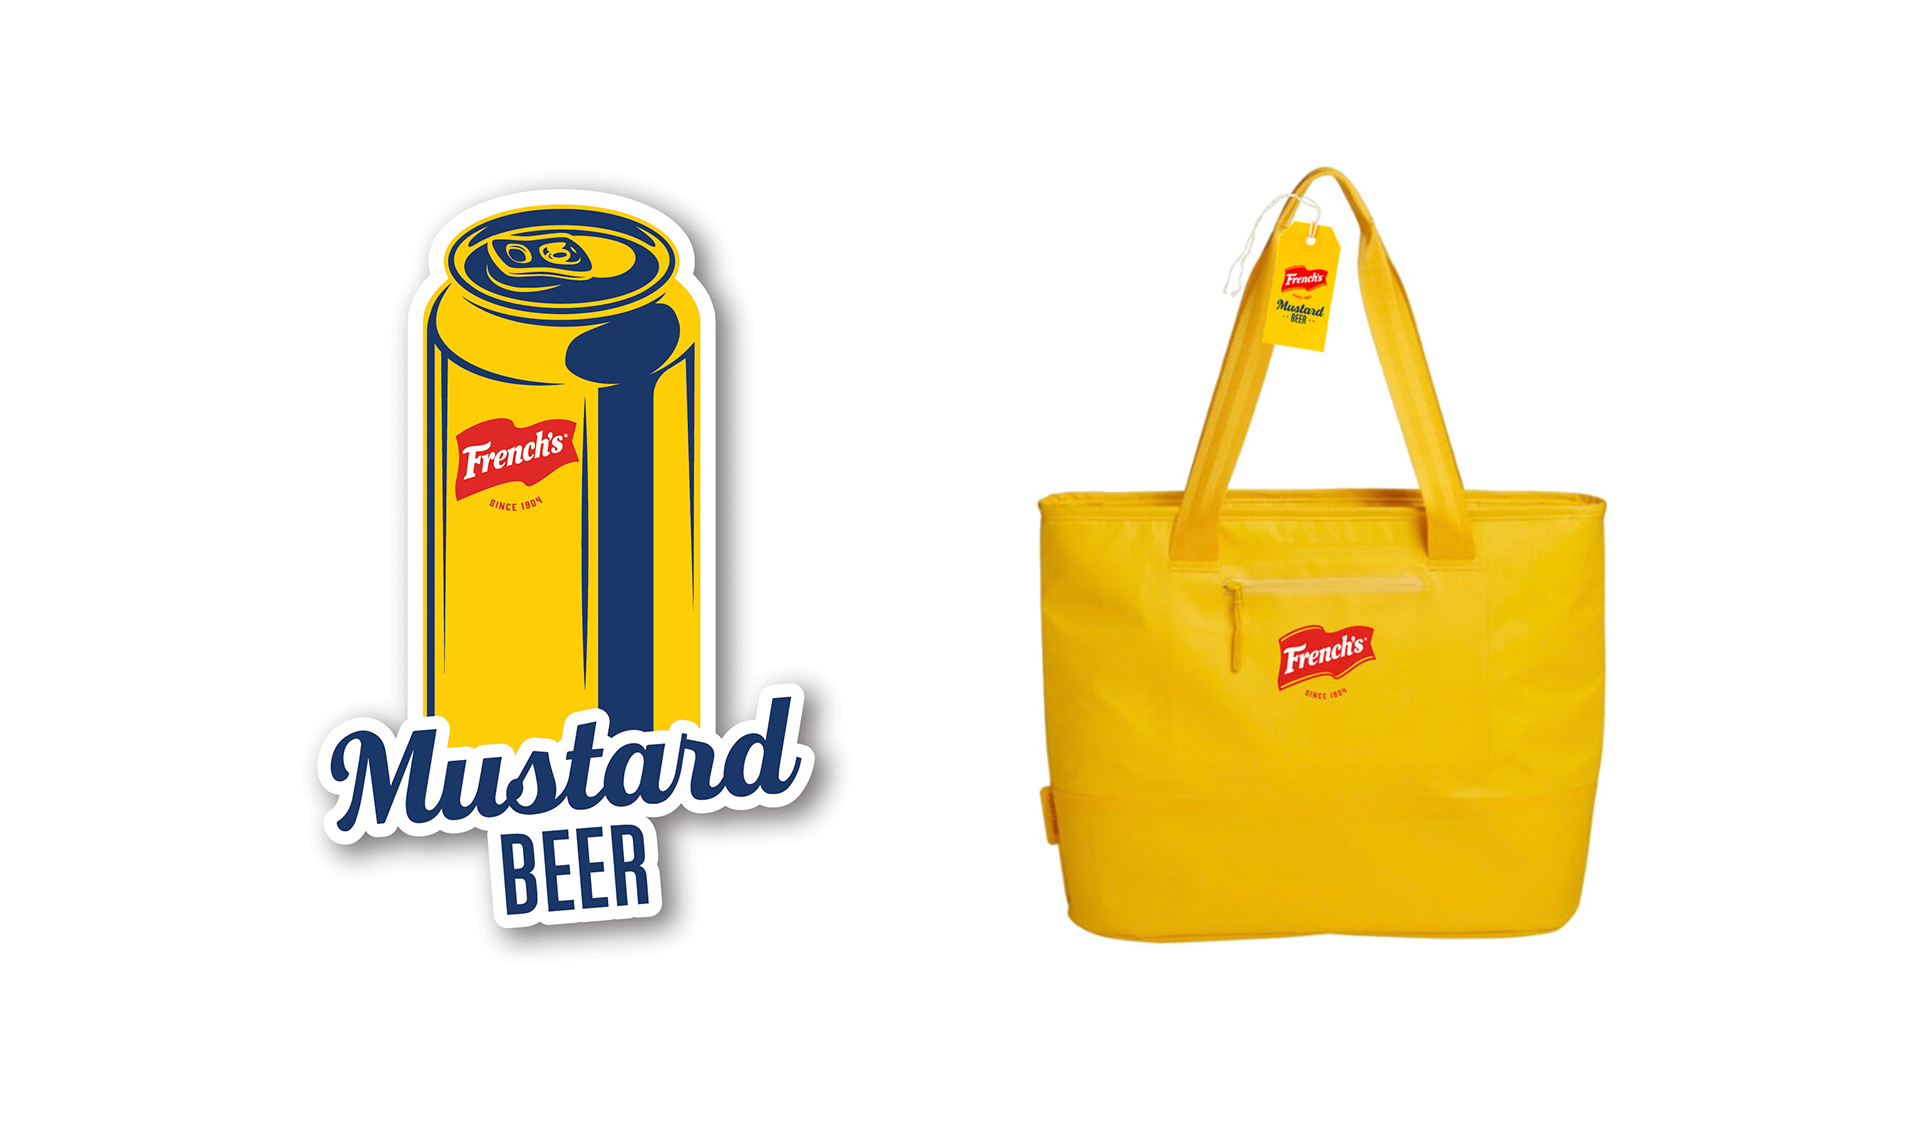 Mustard beer sticker and bag